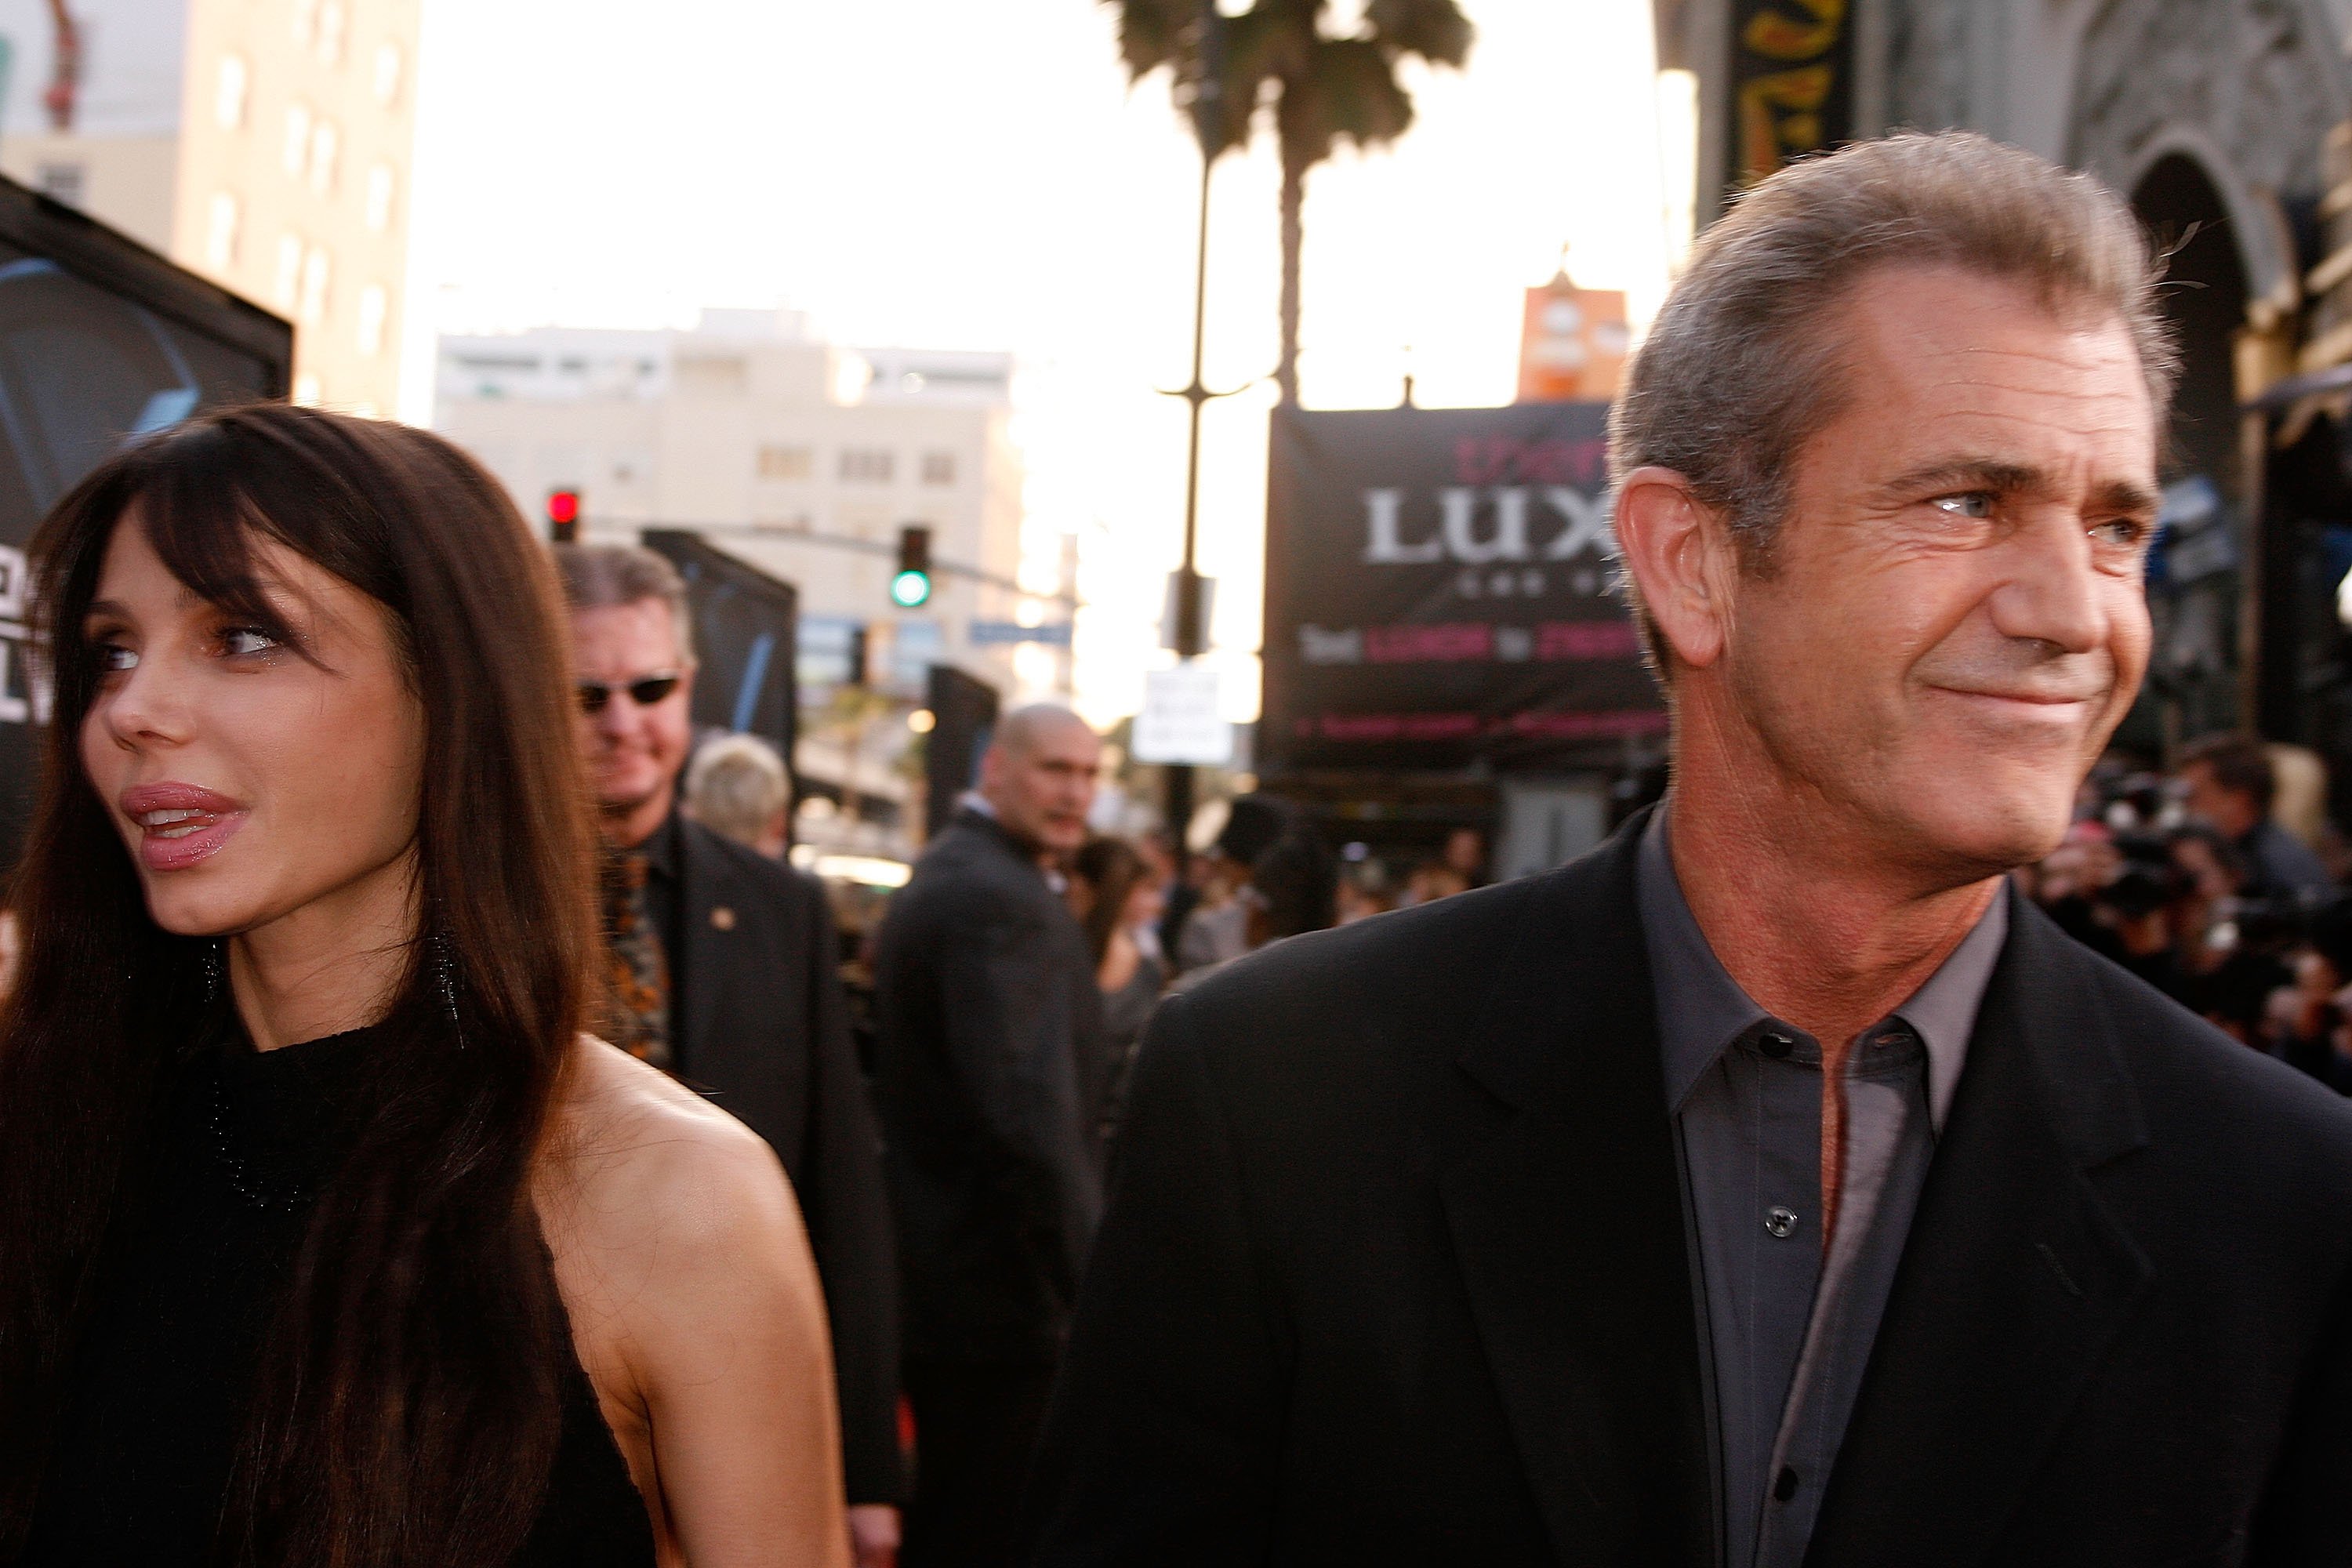 Oksana Grigorieva and Mel Gibson arriving on the red carpet of the Los Angeles industry screening of "X-Men Origins: Wolverine" at the Grauman's Mann Chinese Theater on April 28, 2009 in Hollywood, California. / Source: Getty Images